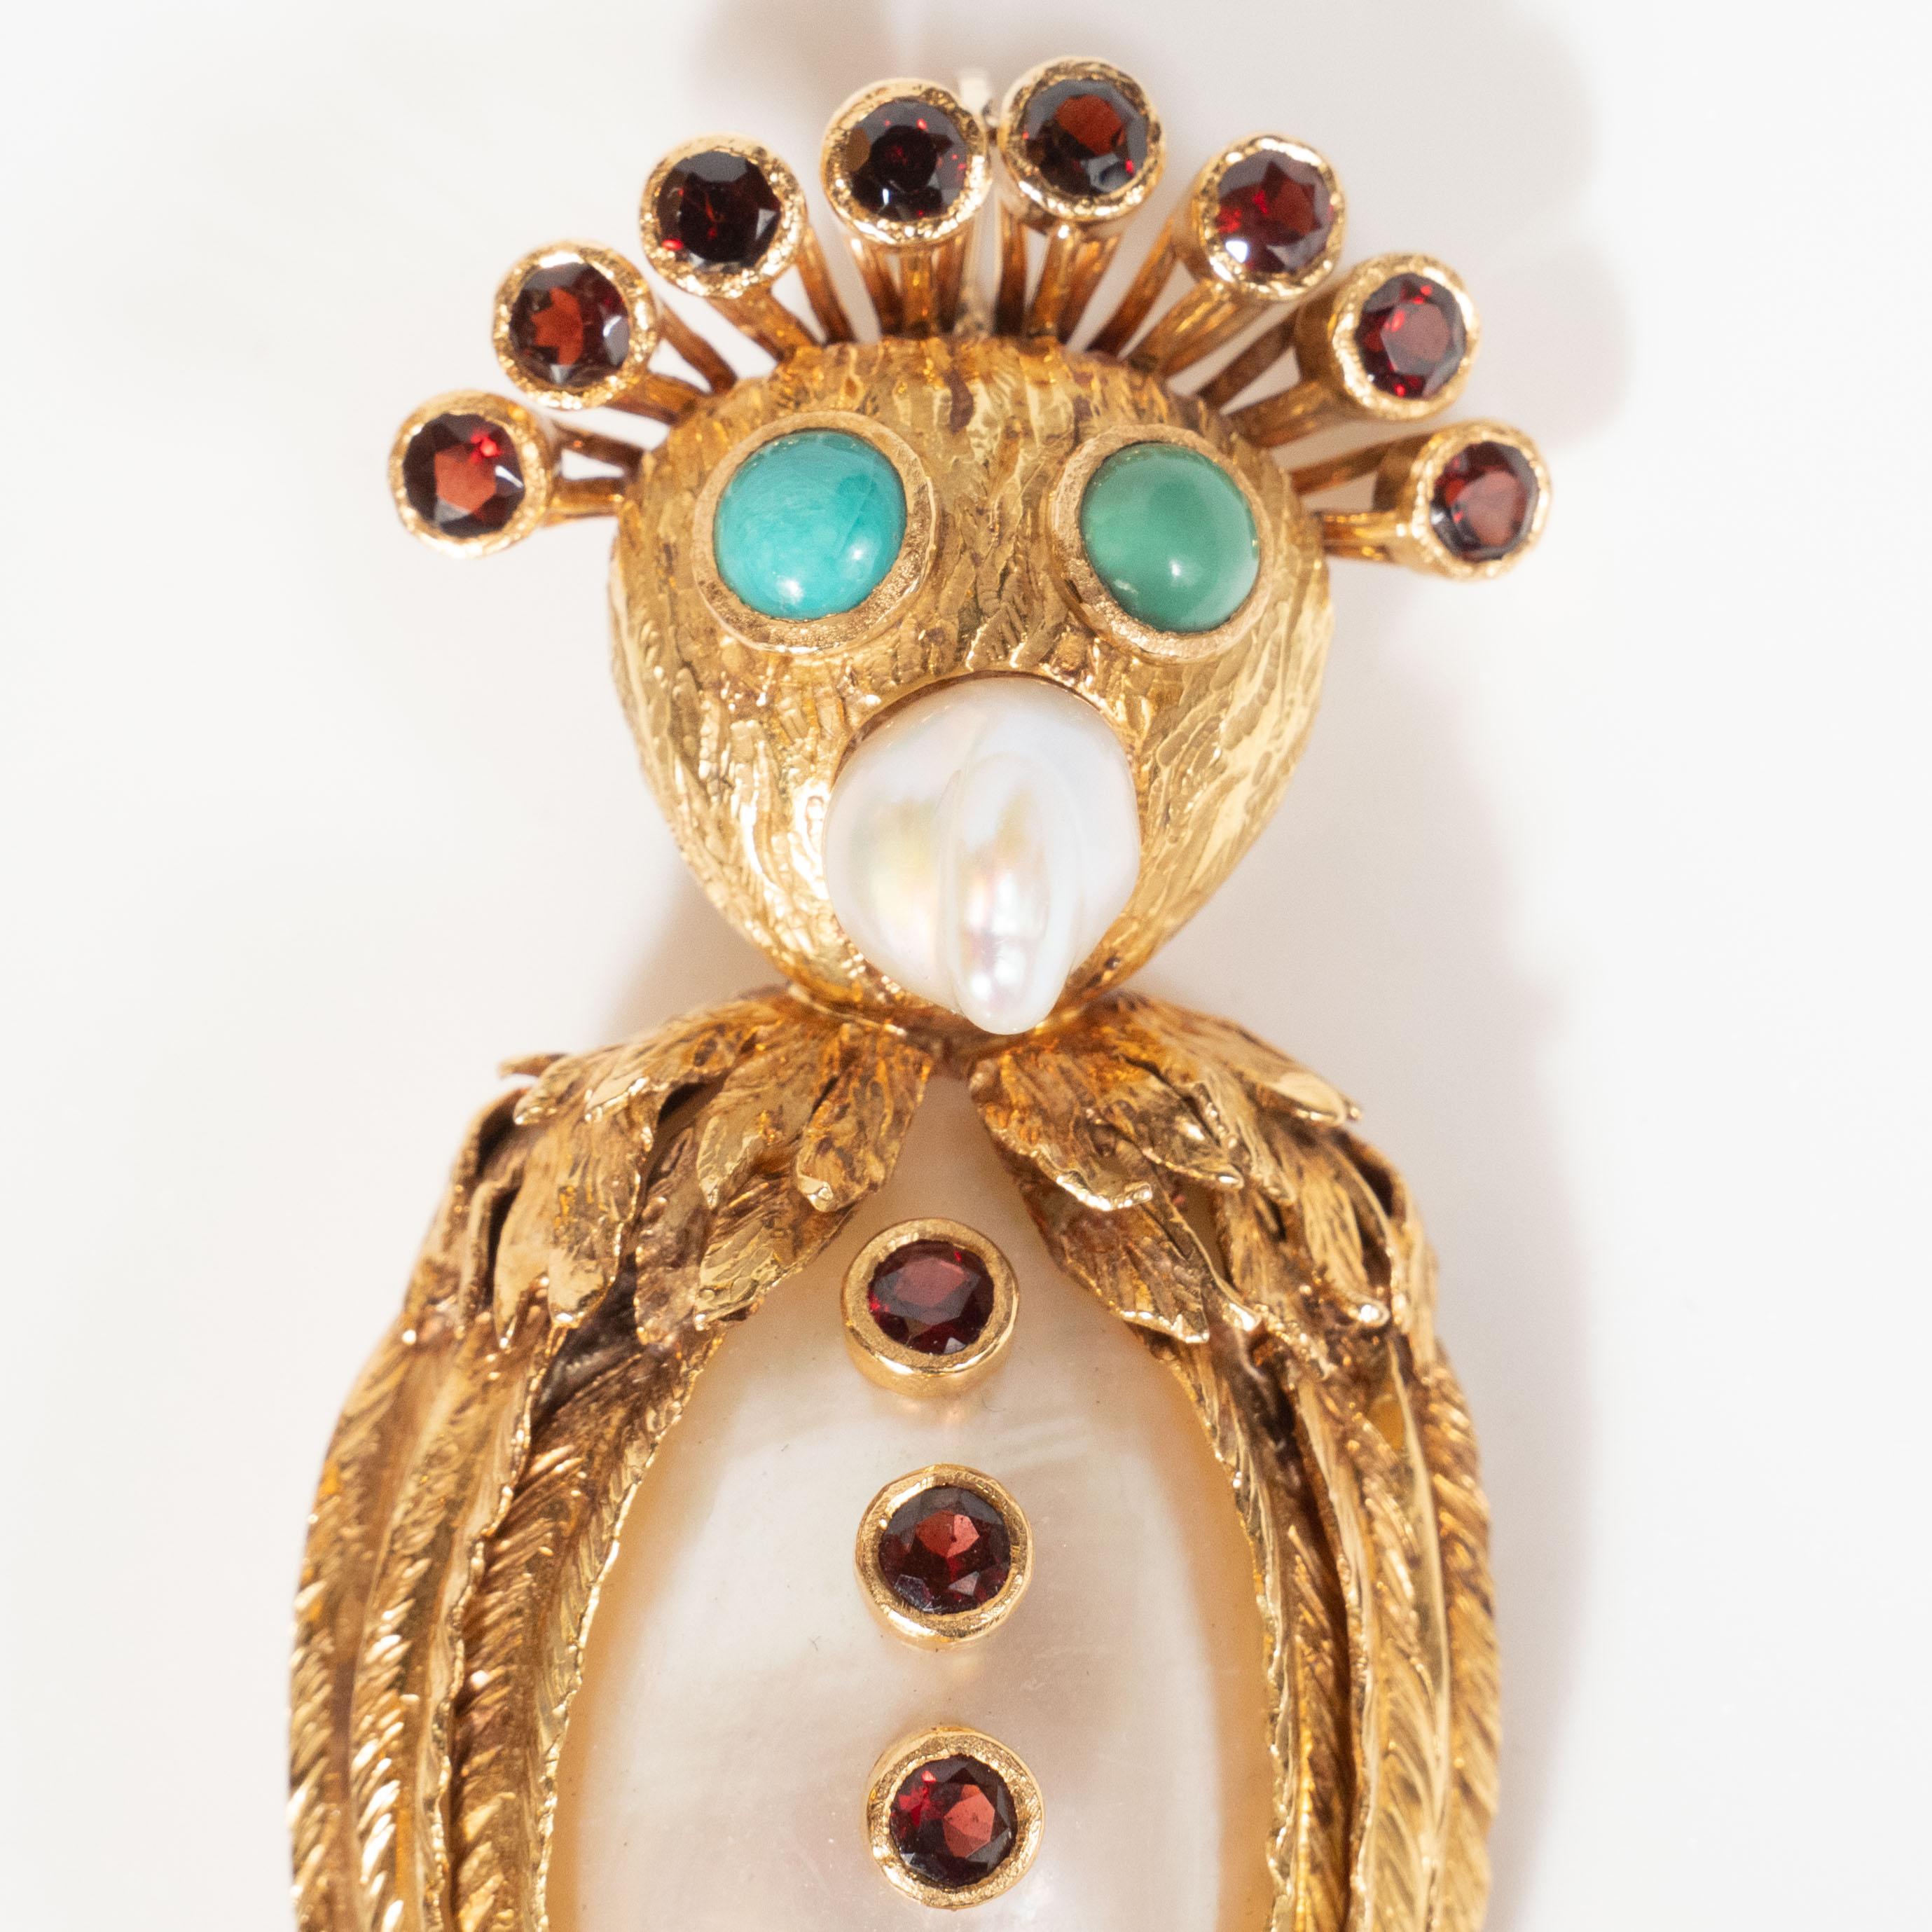 This dazzling and whimsical owl brooch features a nacreous mollusk body adorned with six Campari hued garnet 